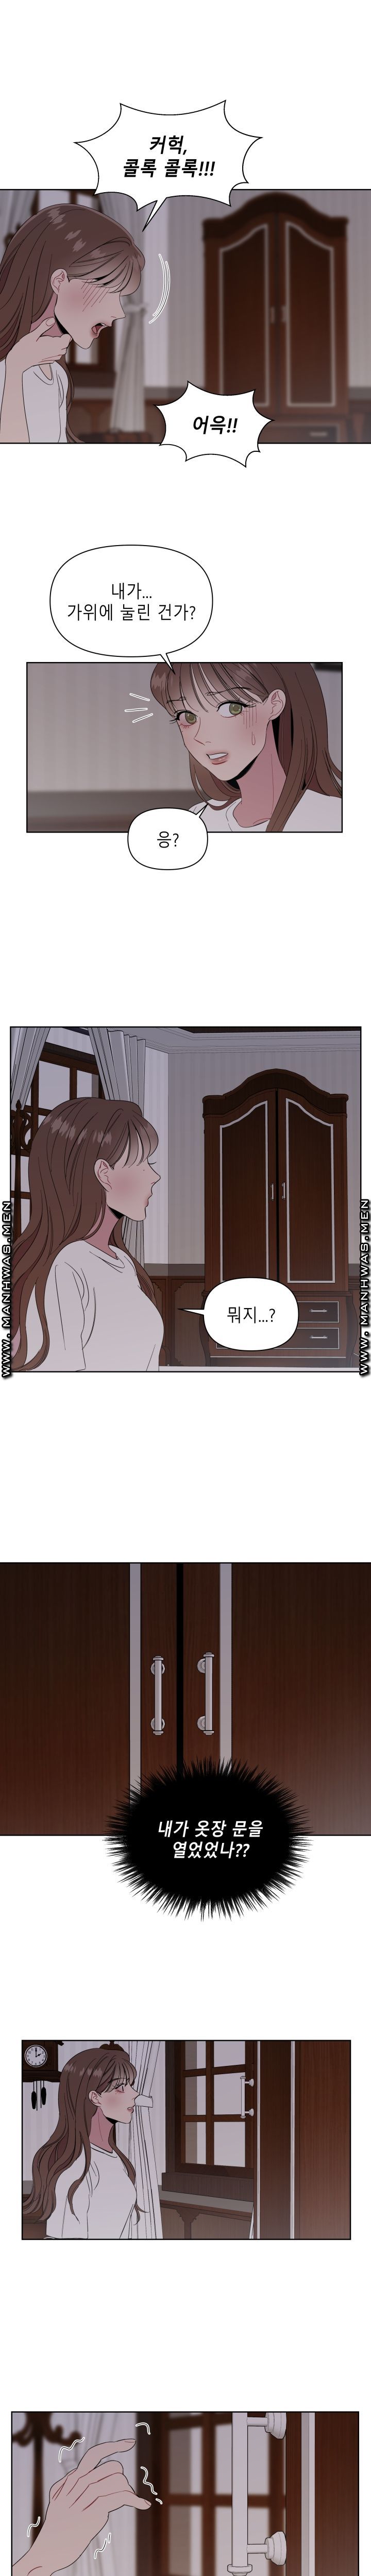 Heaven Raw - Chapter 3 Page 7